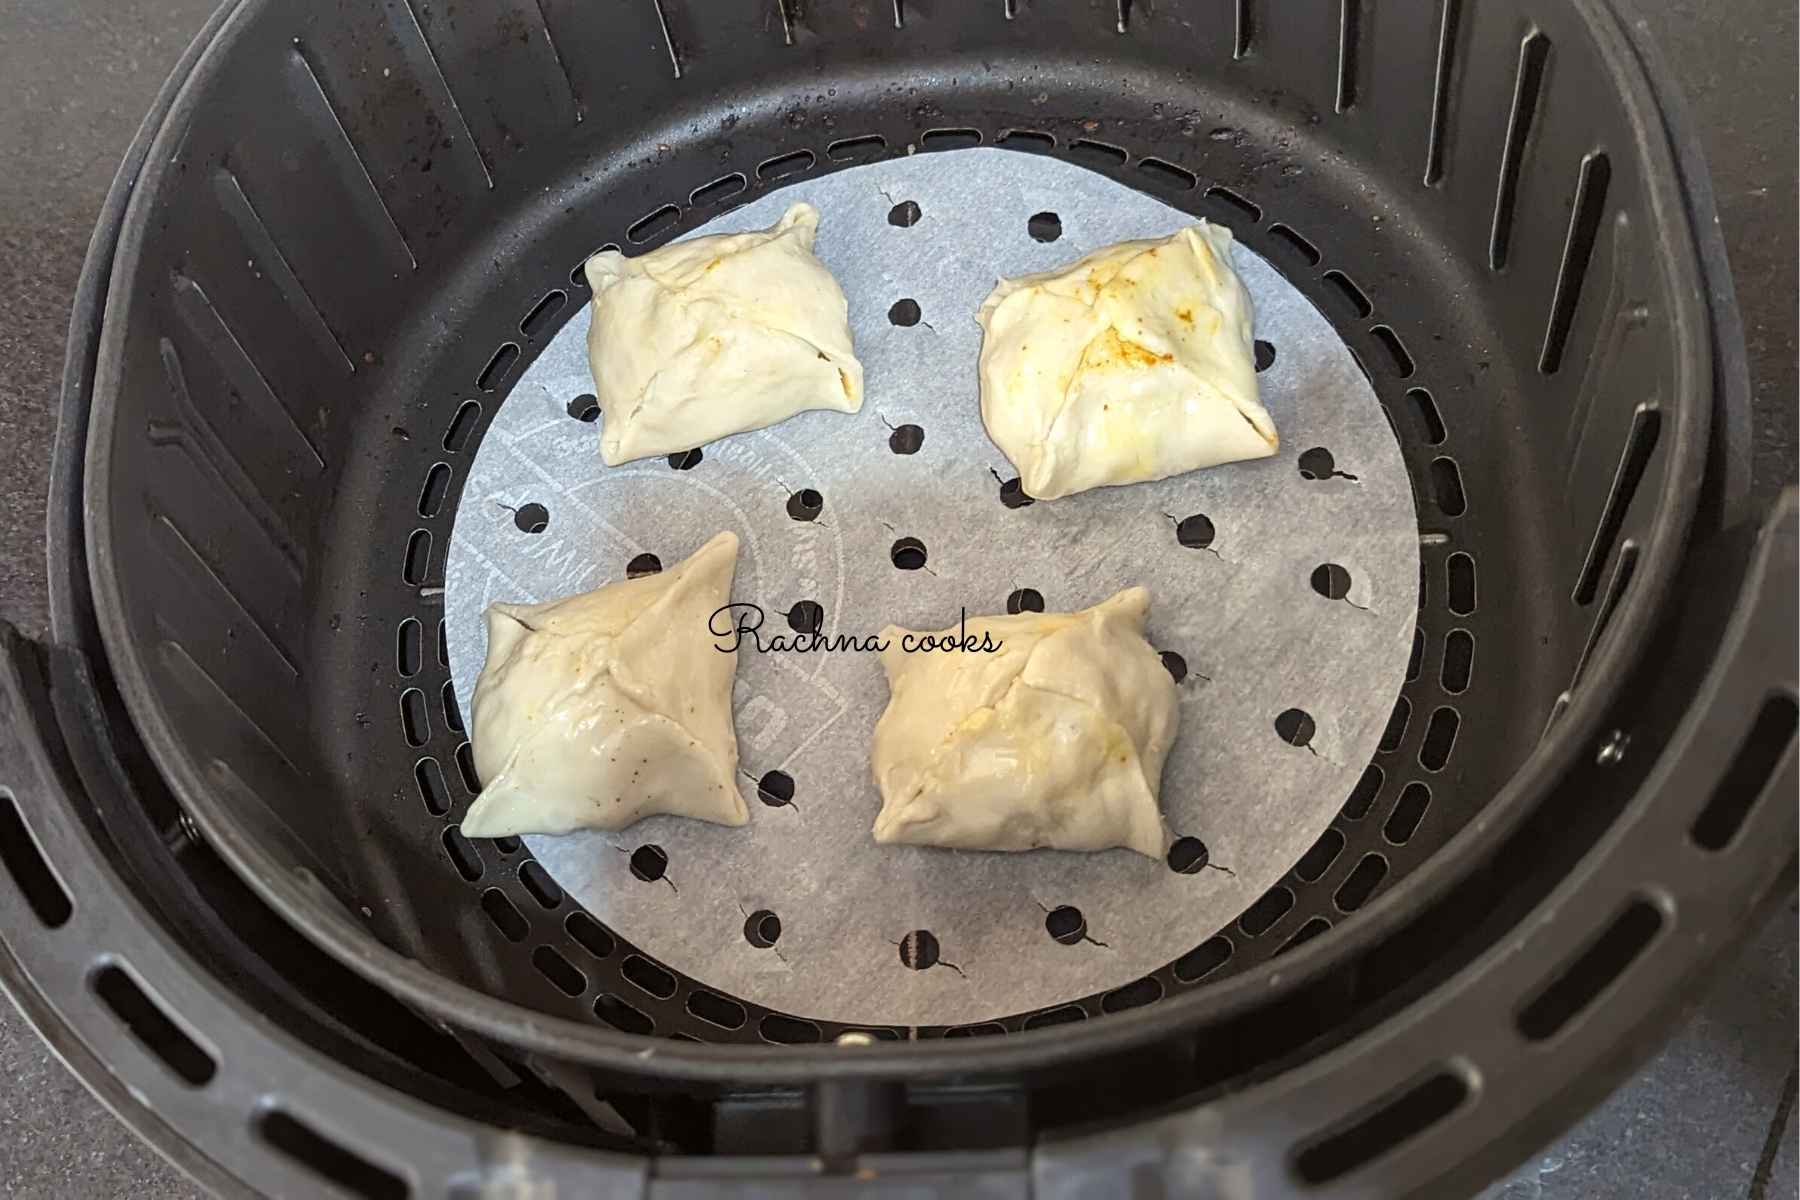 4 egg puffs in air fryer basket ready for air frying.